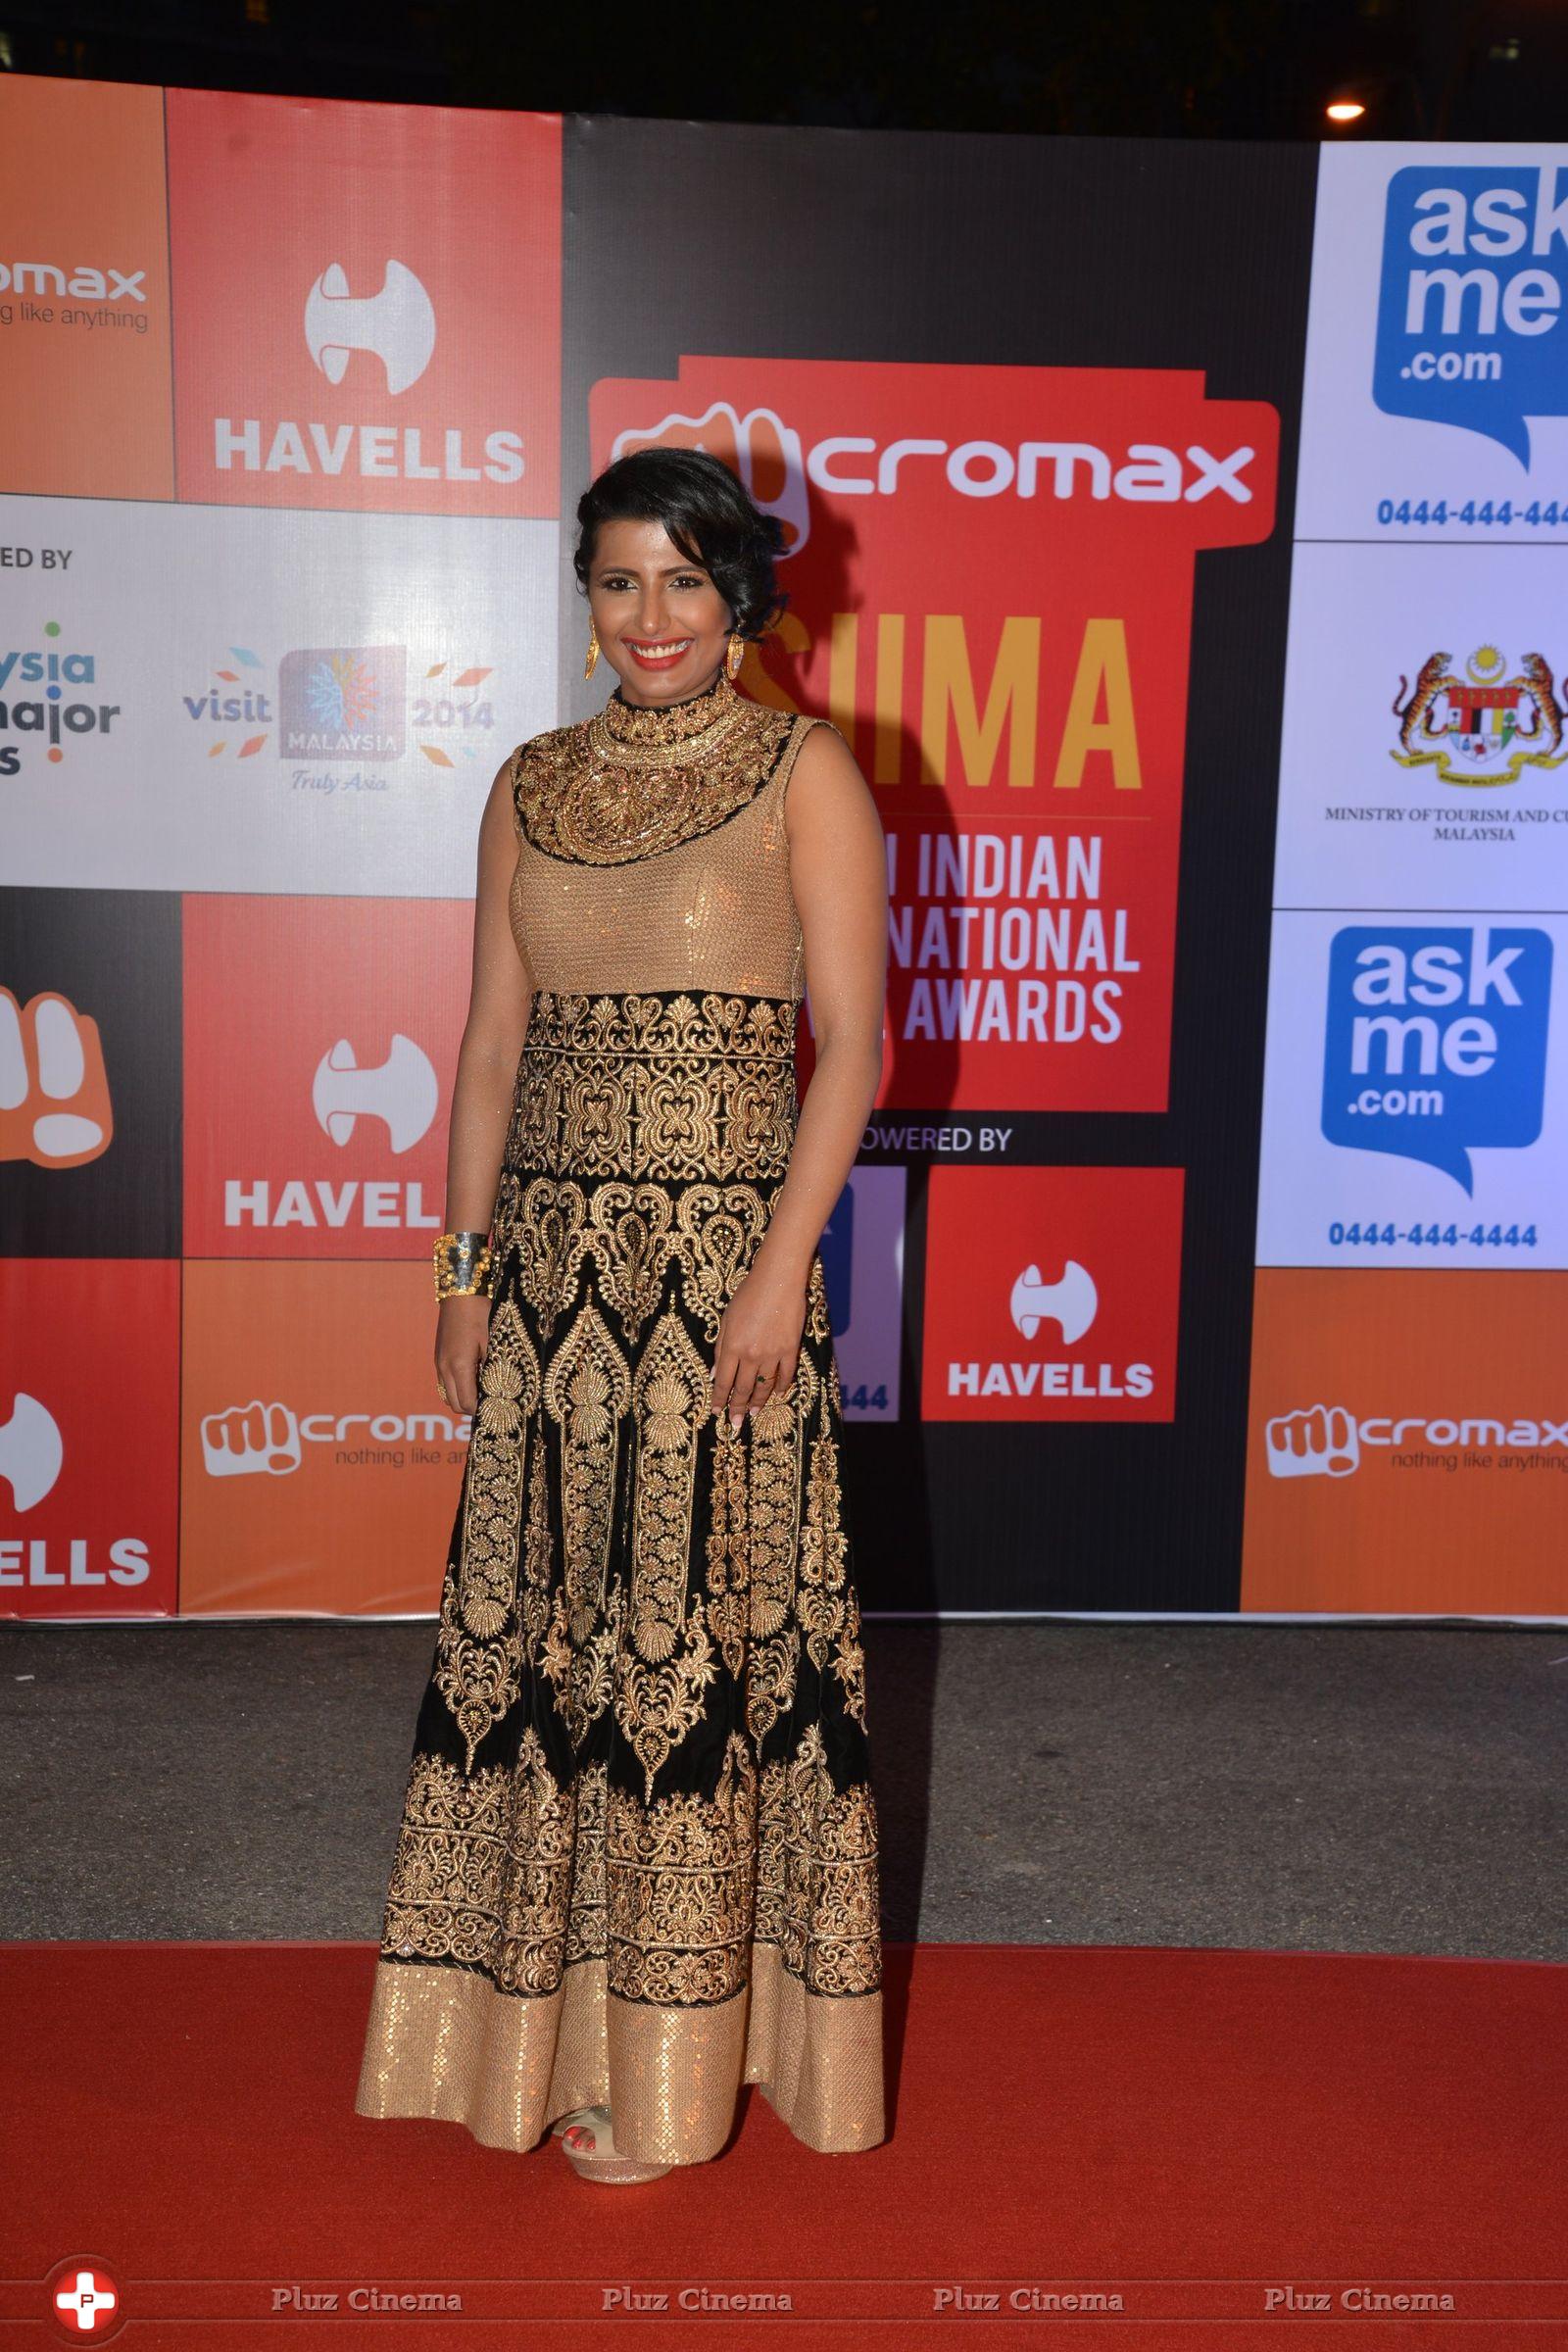 Micromax SIIMA Awards in Malaysia Photos | Picture 822822